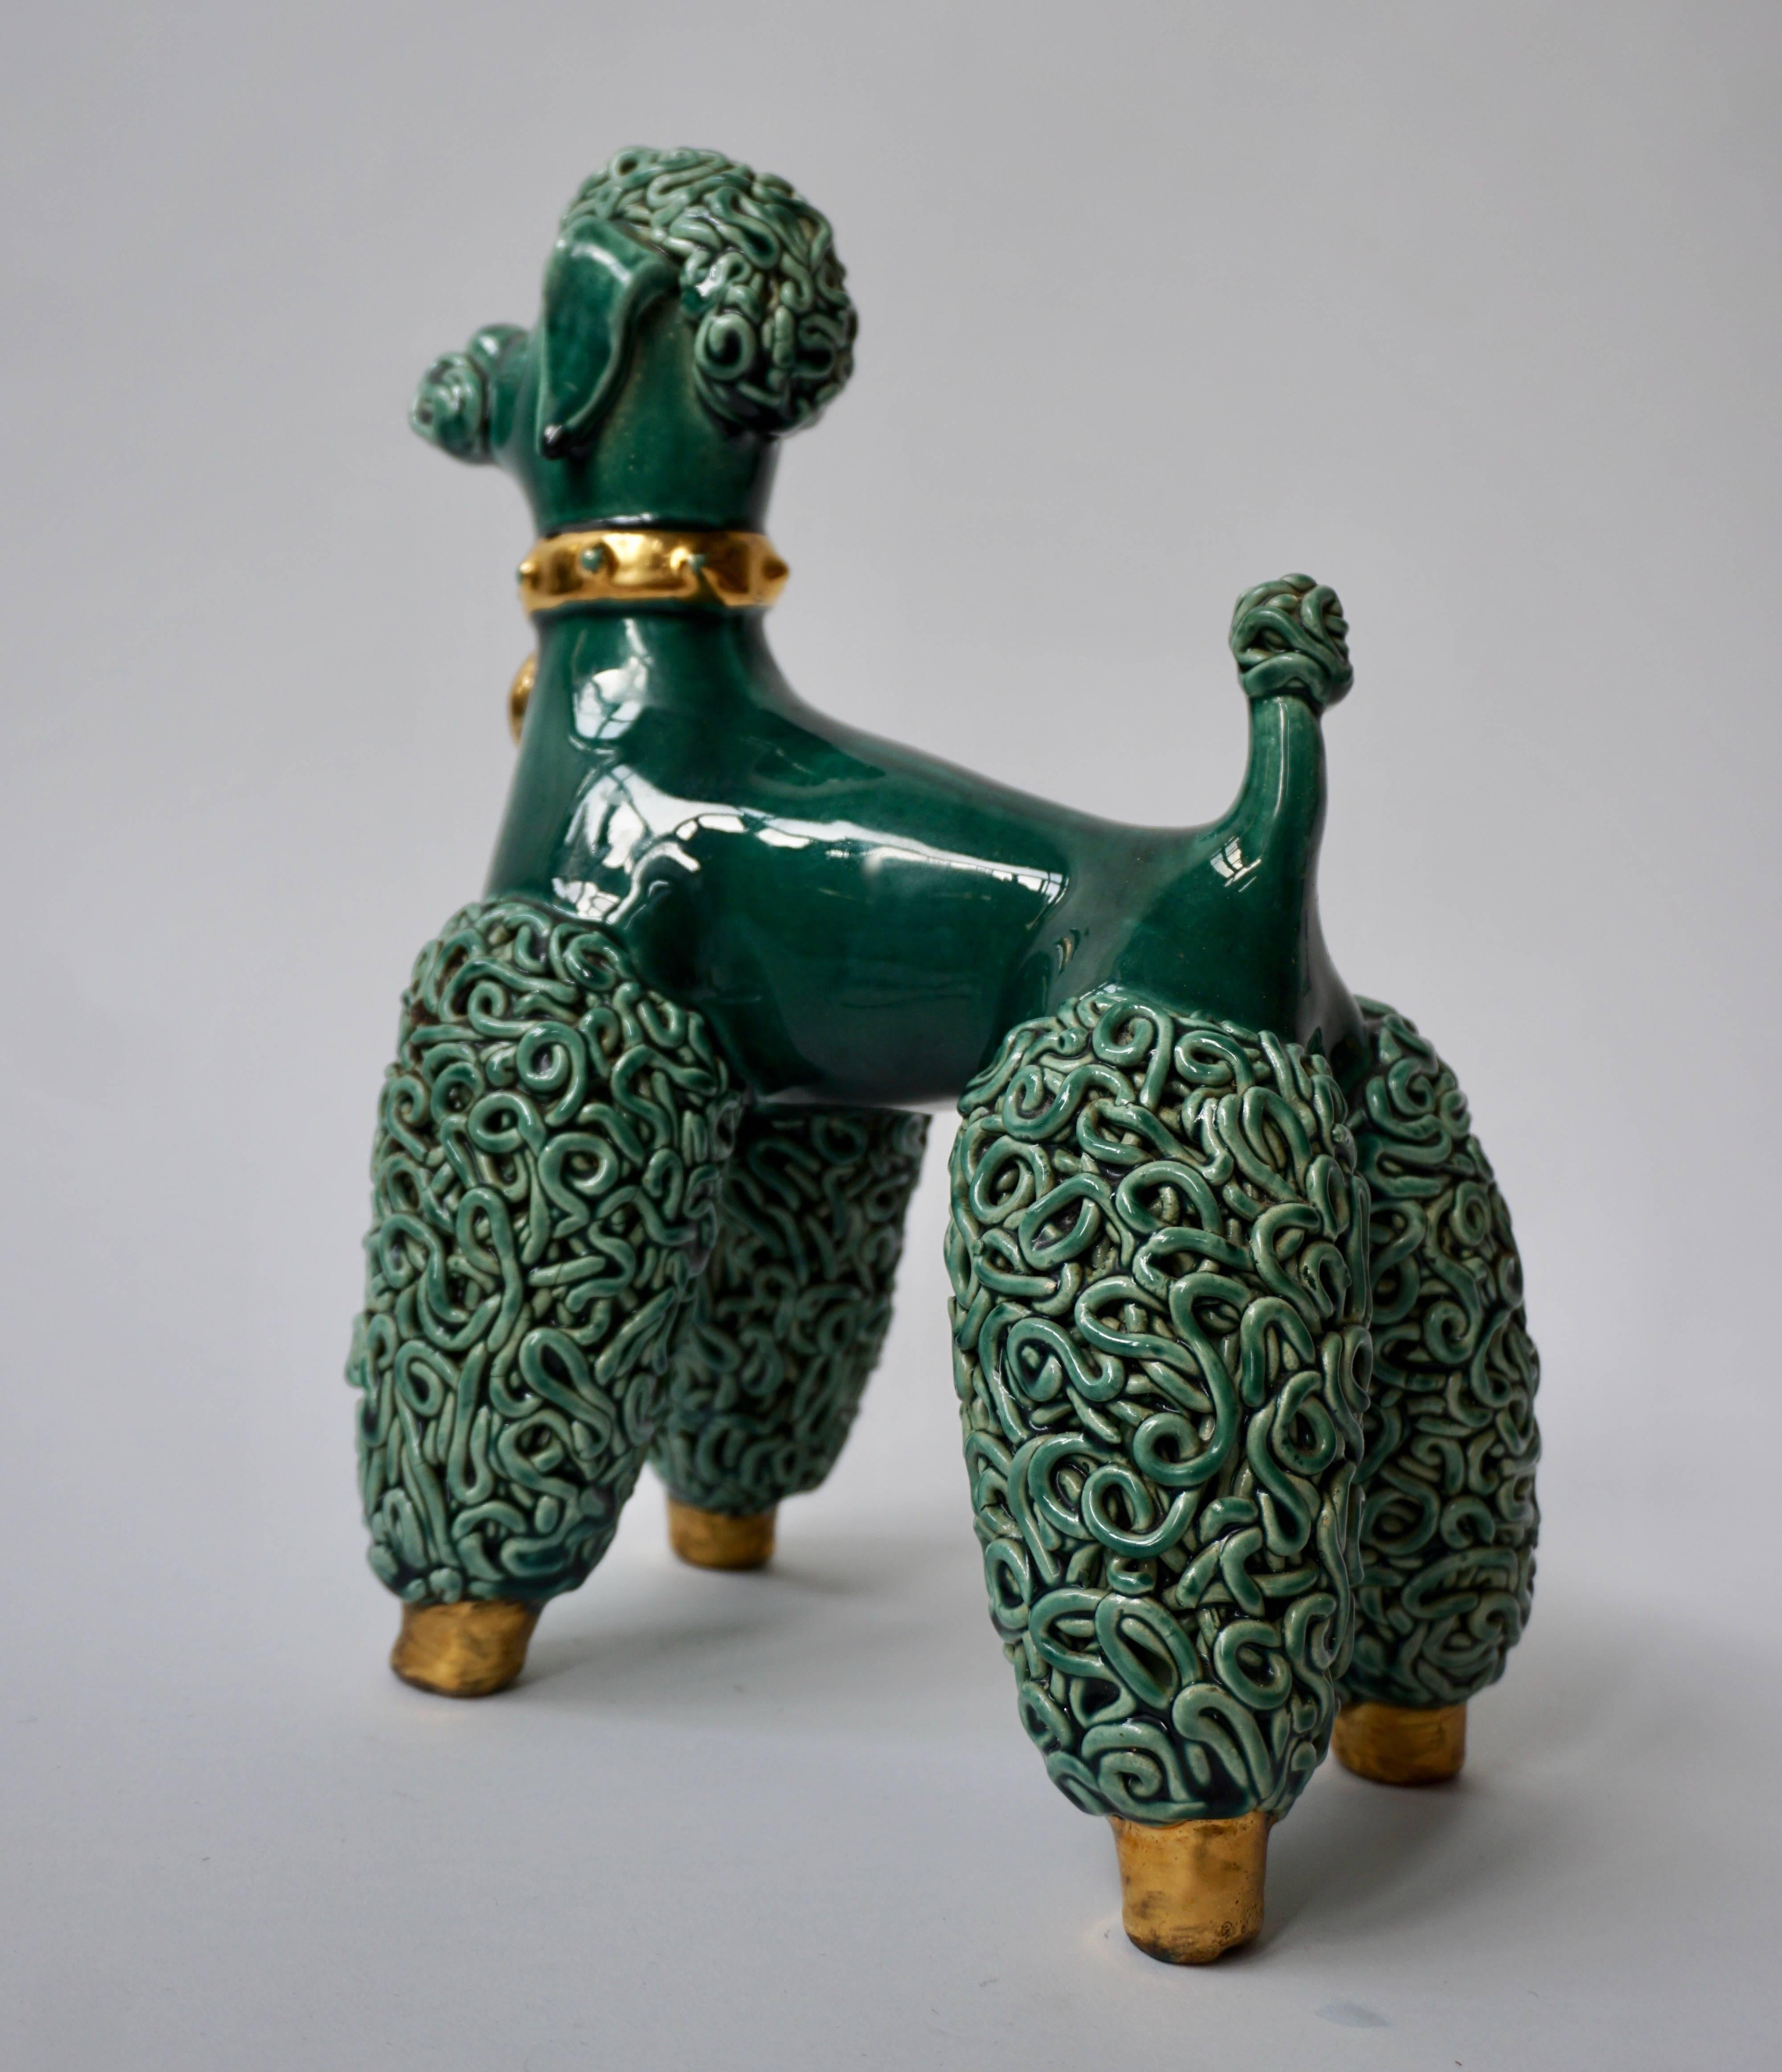 A midcentury ceramic porcelain 'Spaghetti' poodle dog sculpture.
Poodle dog's have traditional poodle cut, stance, detail face (eyes, nose, tongue) and gold collar. 
Measures: Height 28 cm.
Width 26 cm.